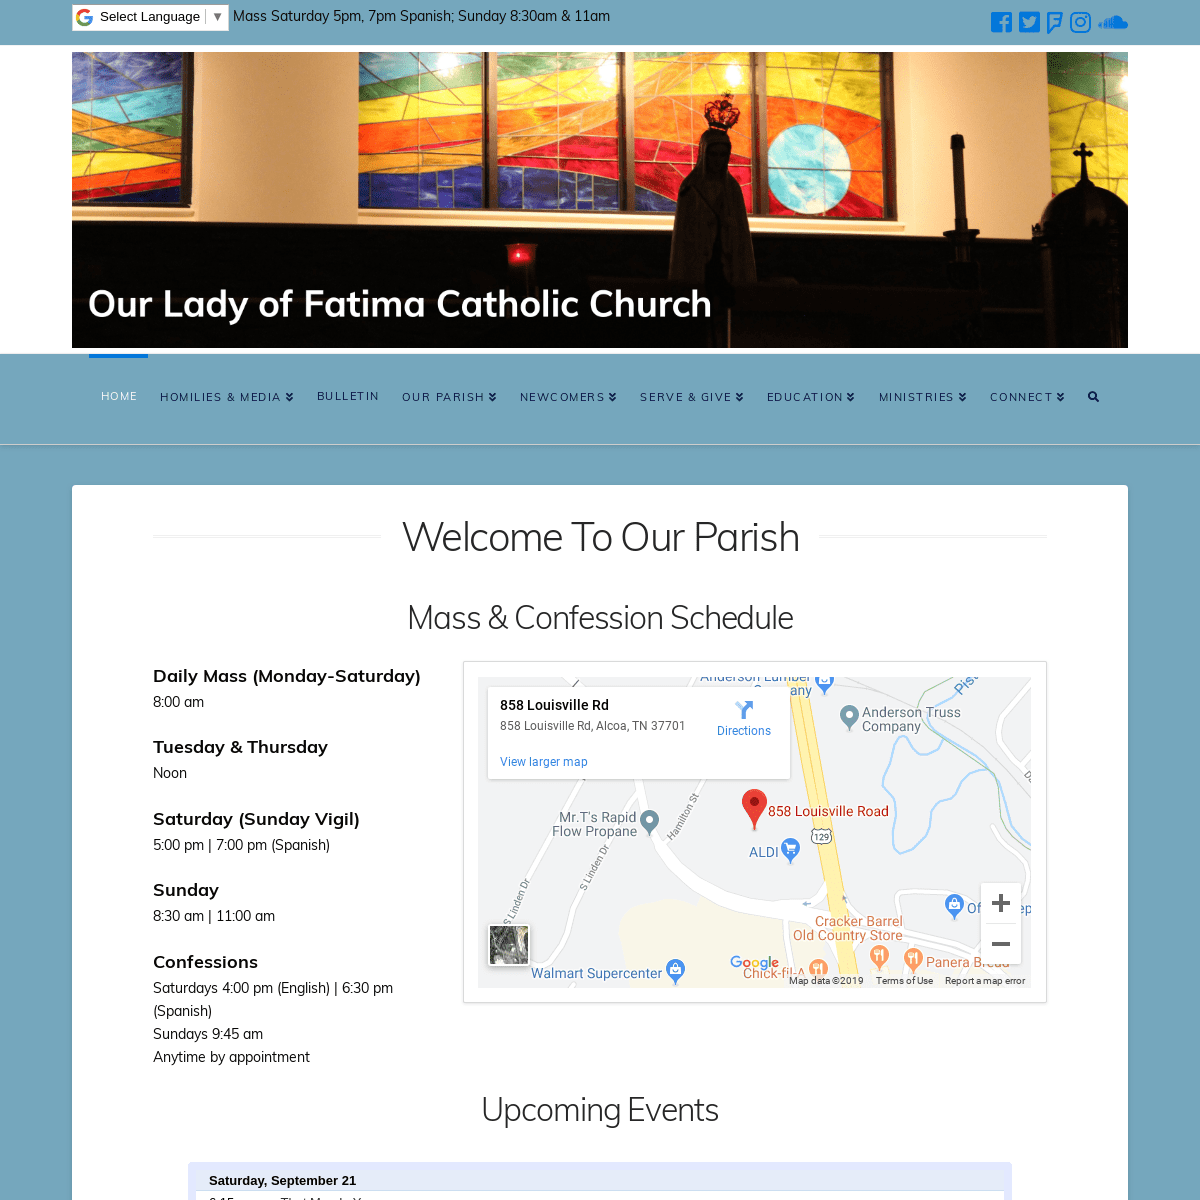 A complete backup of ourladyoffatima.org